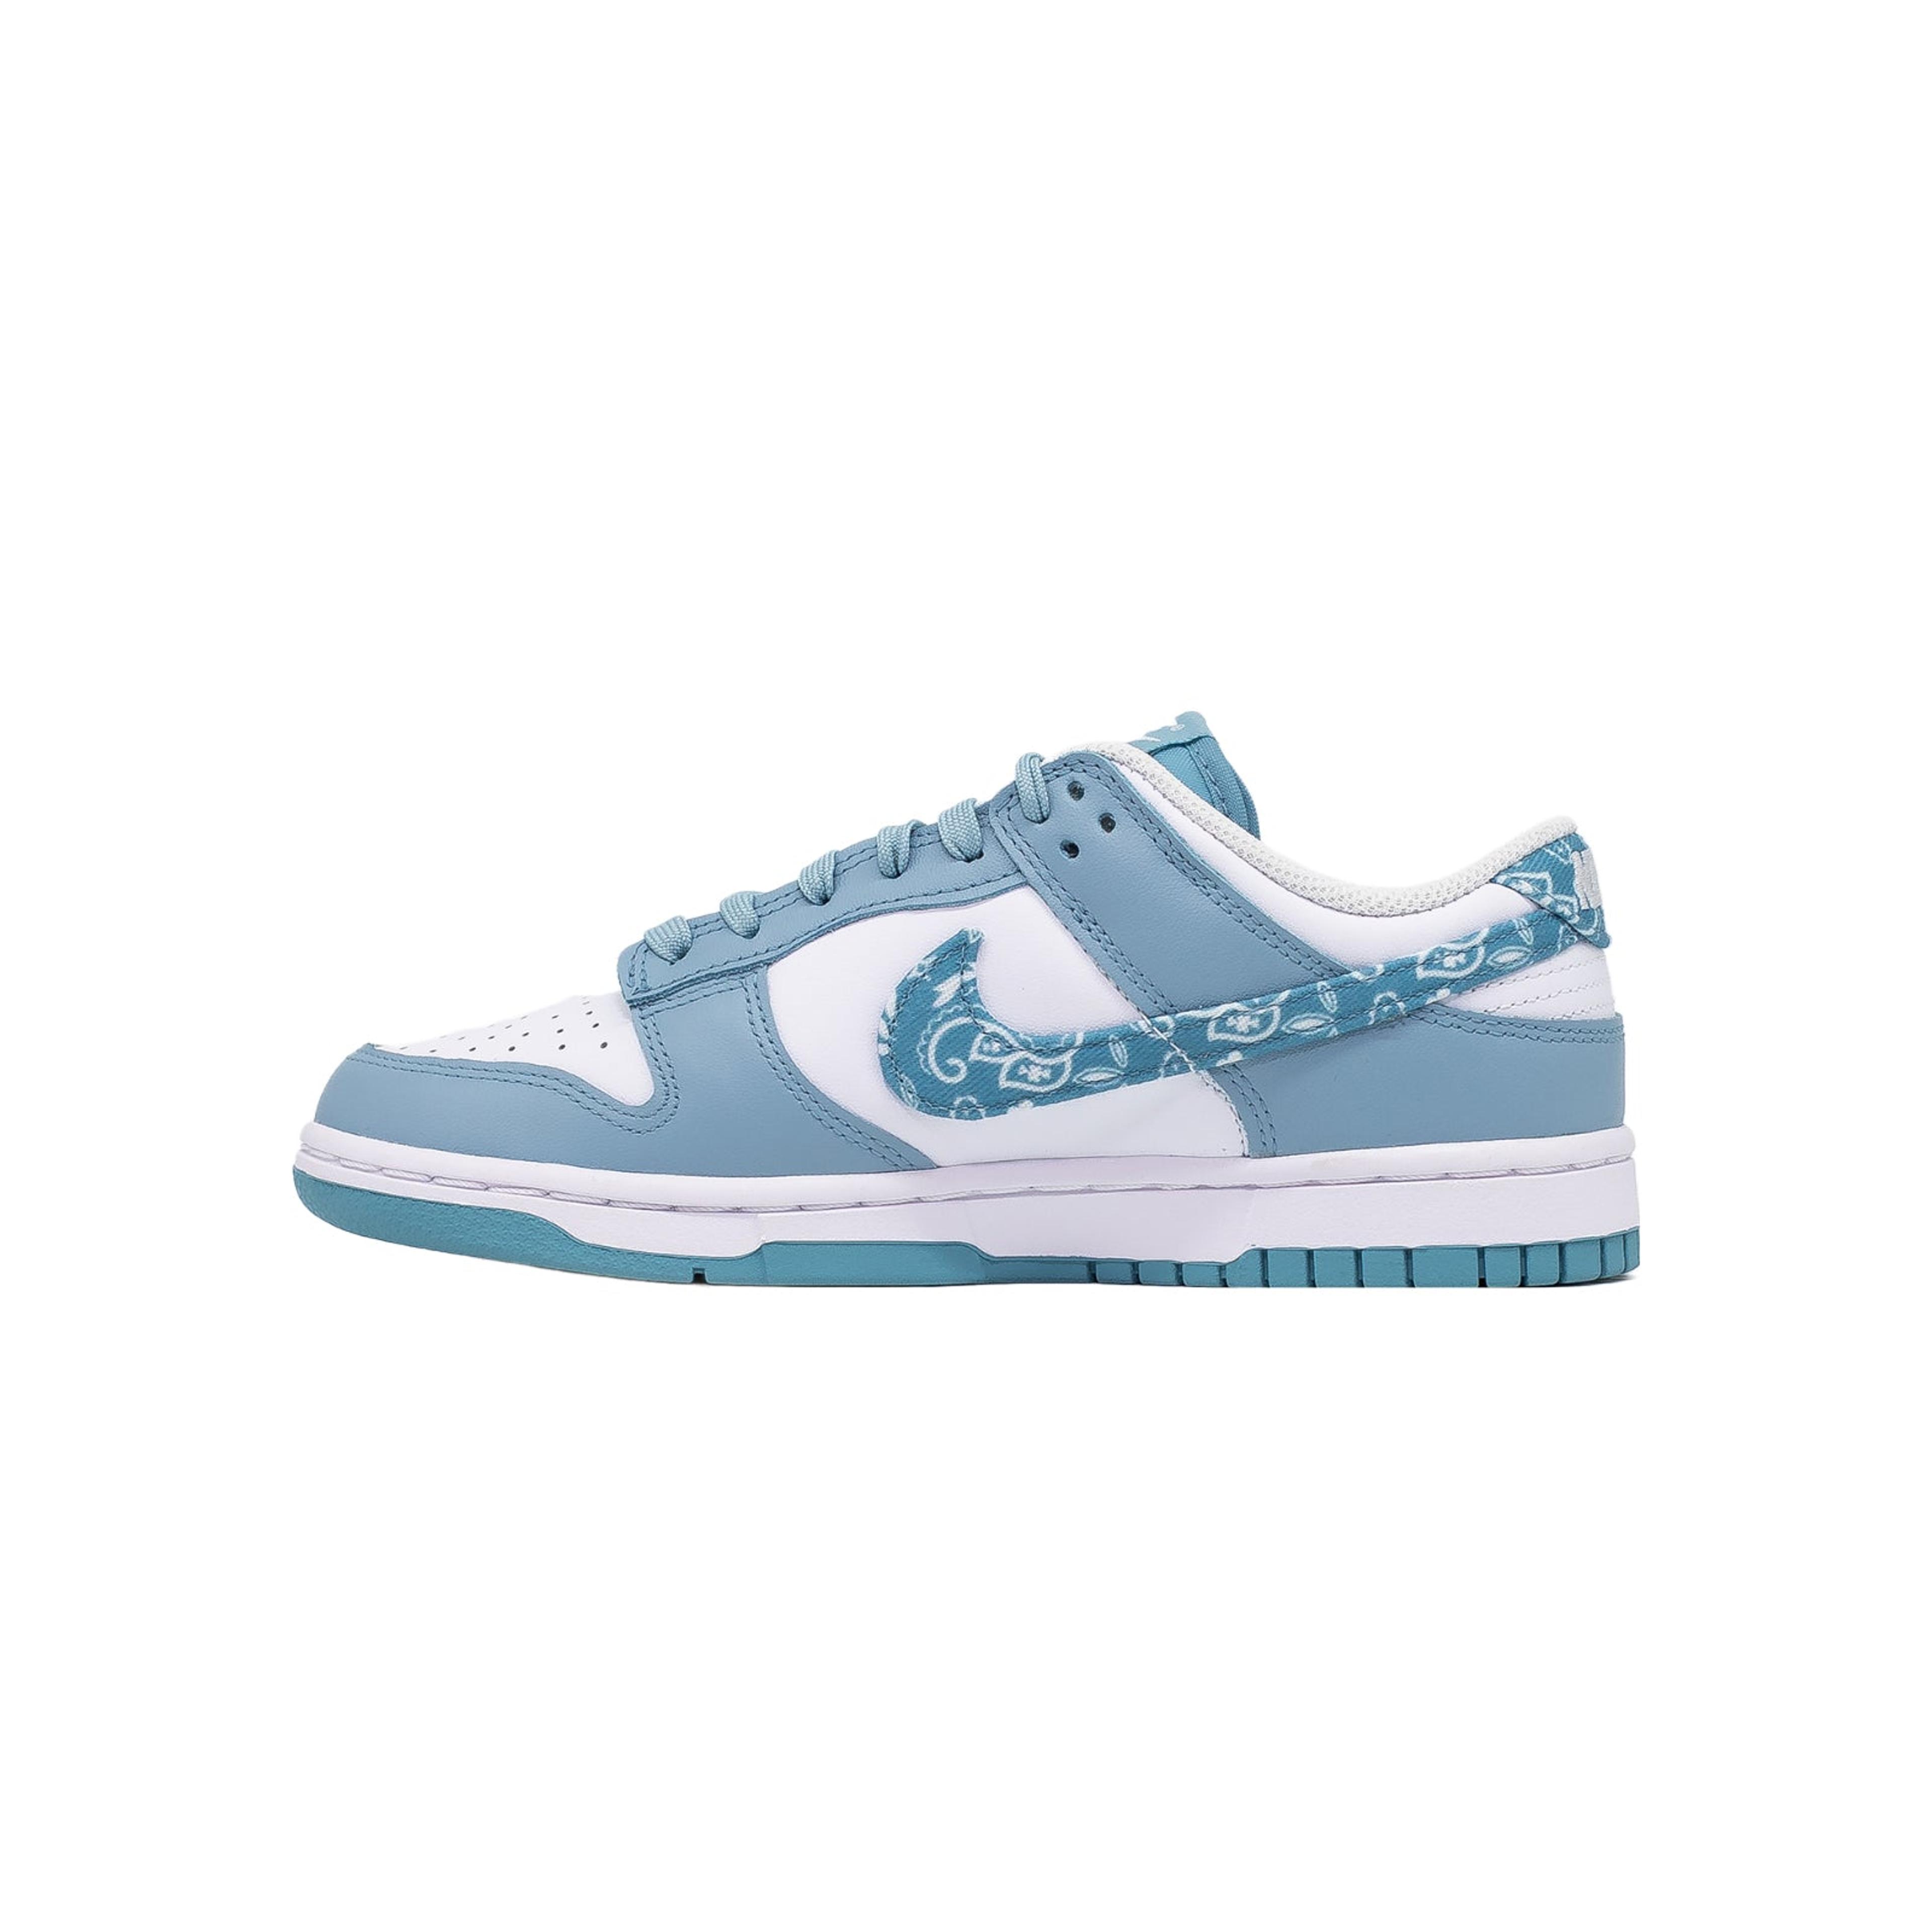 Alternate View 1 of Women's Nike Dunk Low, Blue Paisley